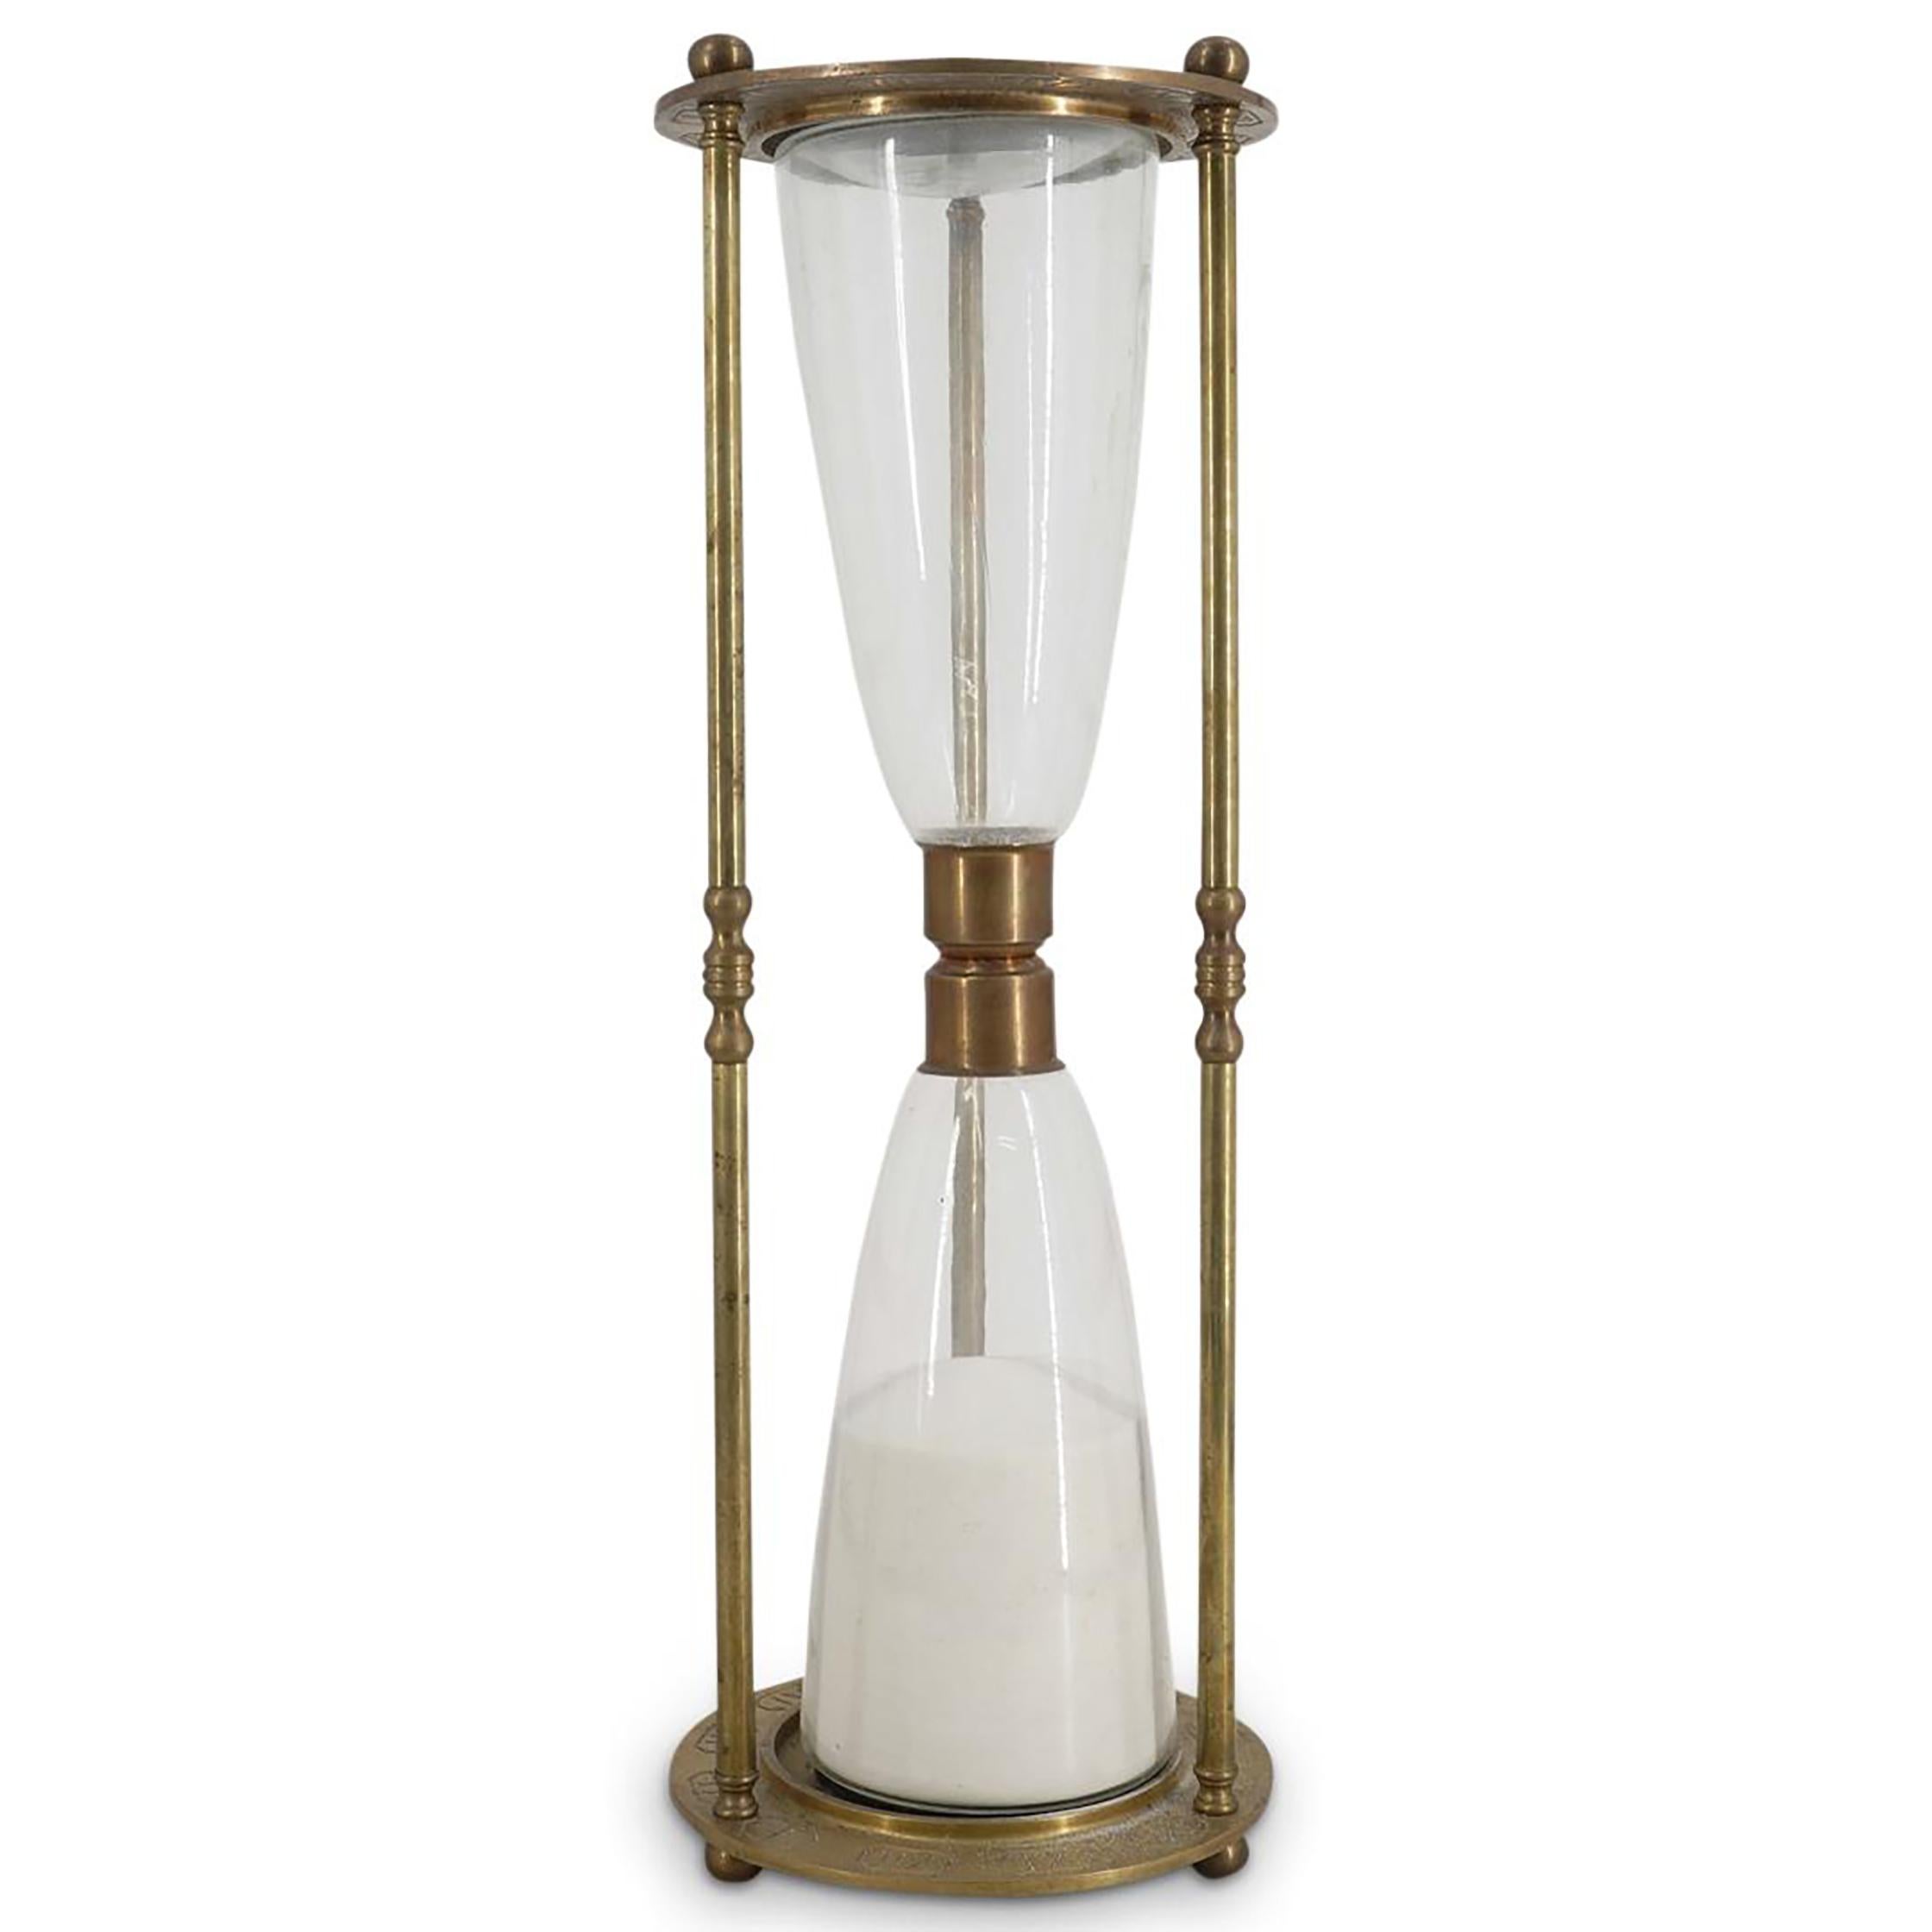 Antique Brass Glass 2.5 Hour Hourglass, Roman Numerals 

Offered for sale is a large, antique brass and glass hourglass with sand.  The brass frame has Roman numerals around the top and bottom brass rings which support the glass. The hourglass is a